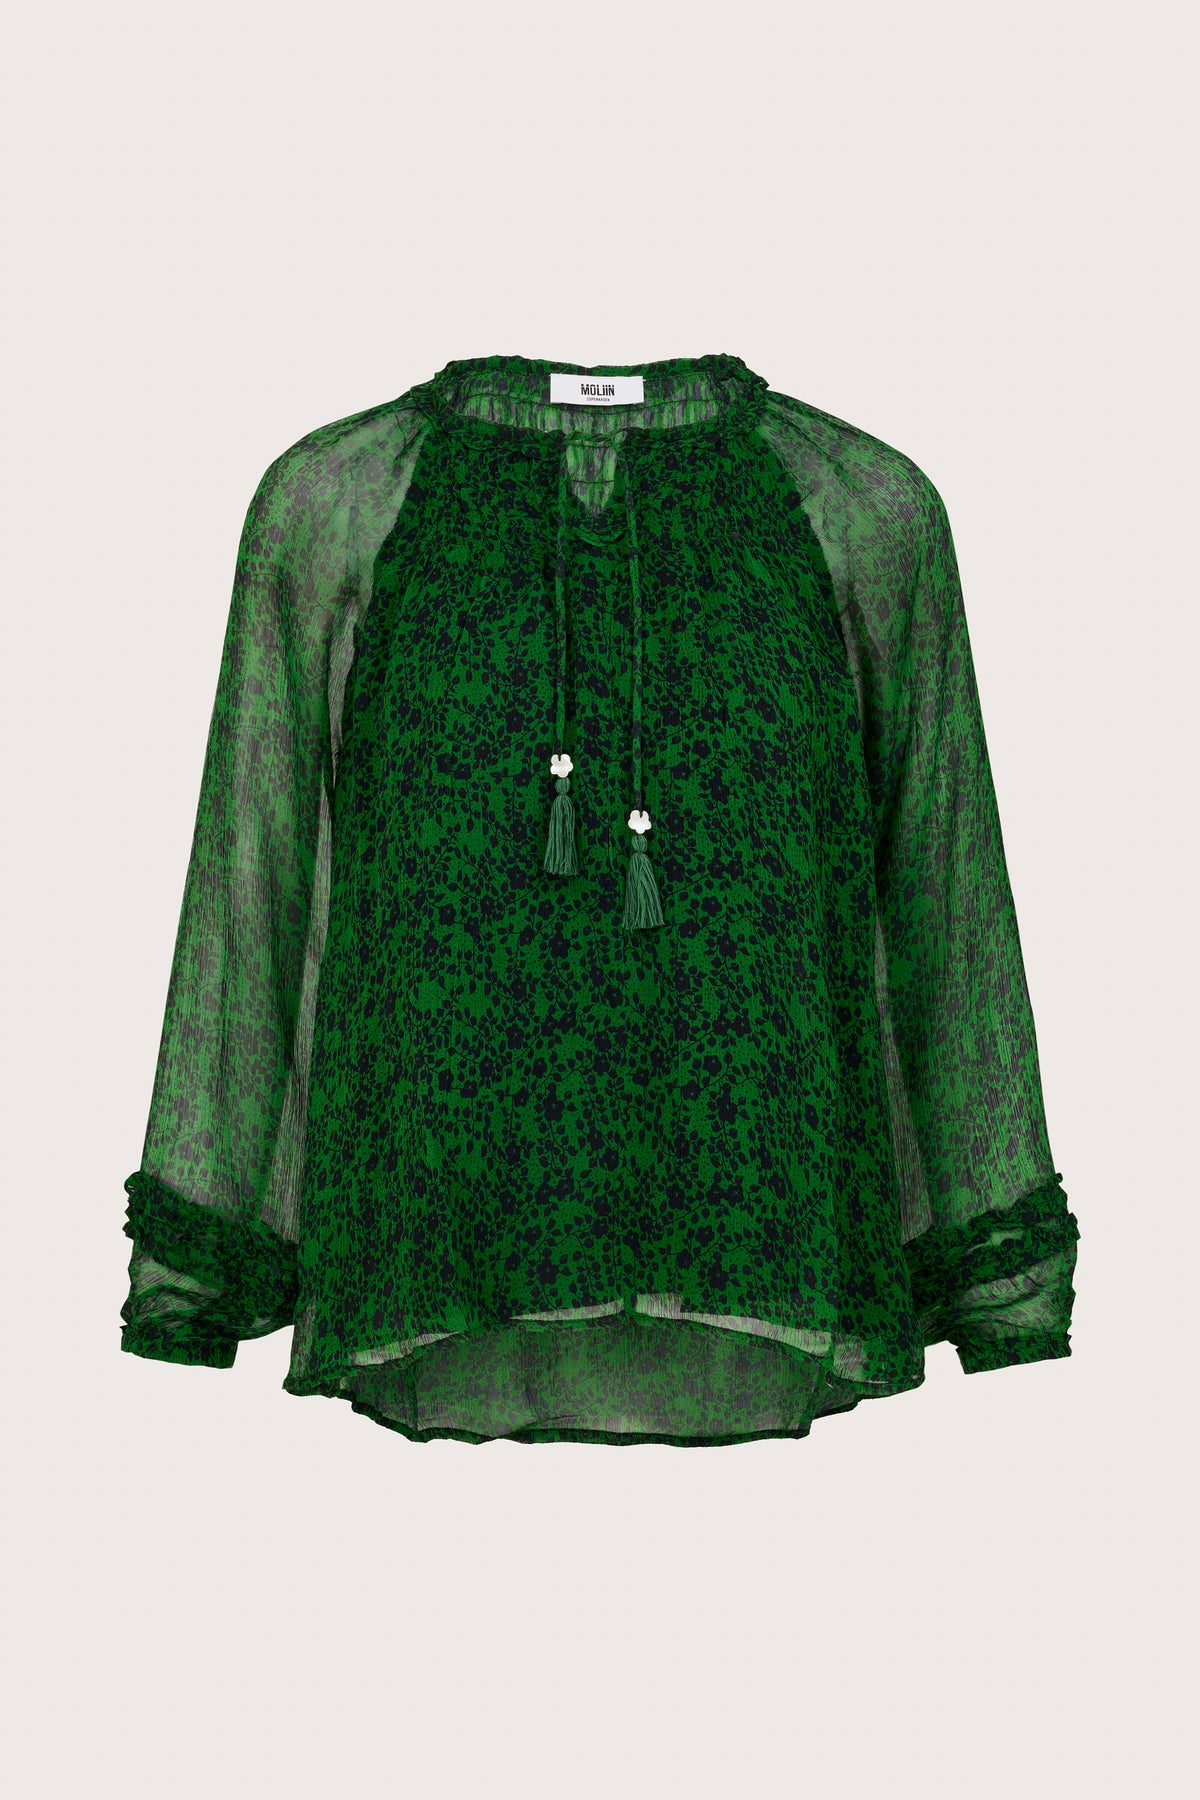 Long sleeve semi sheer blouse in green with black ditsy print